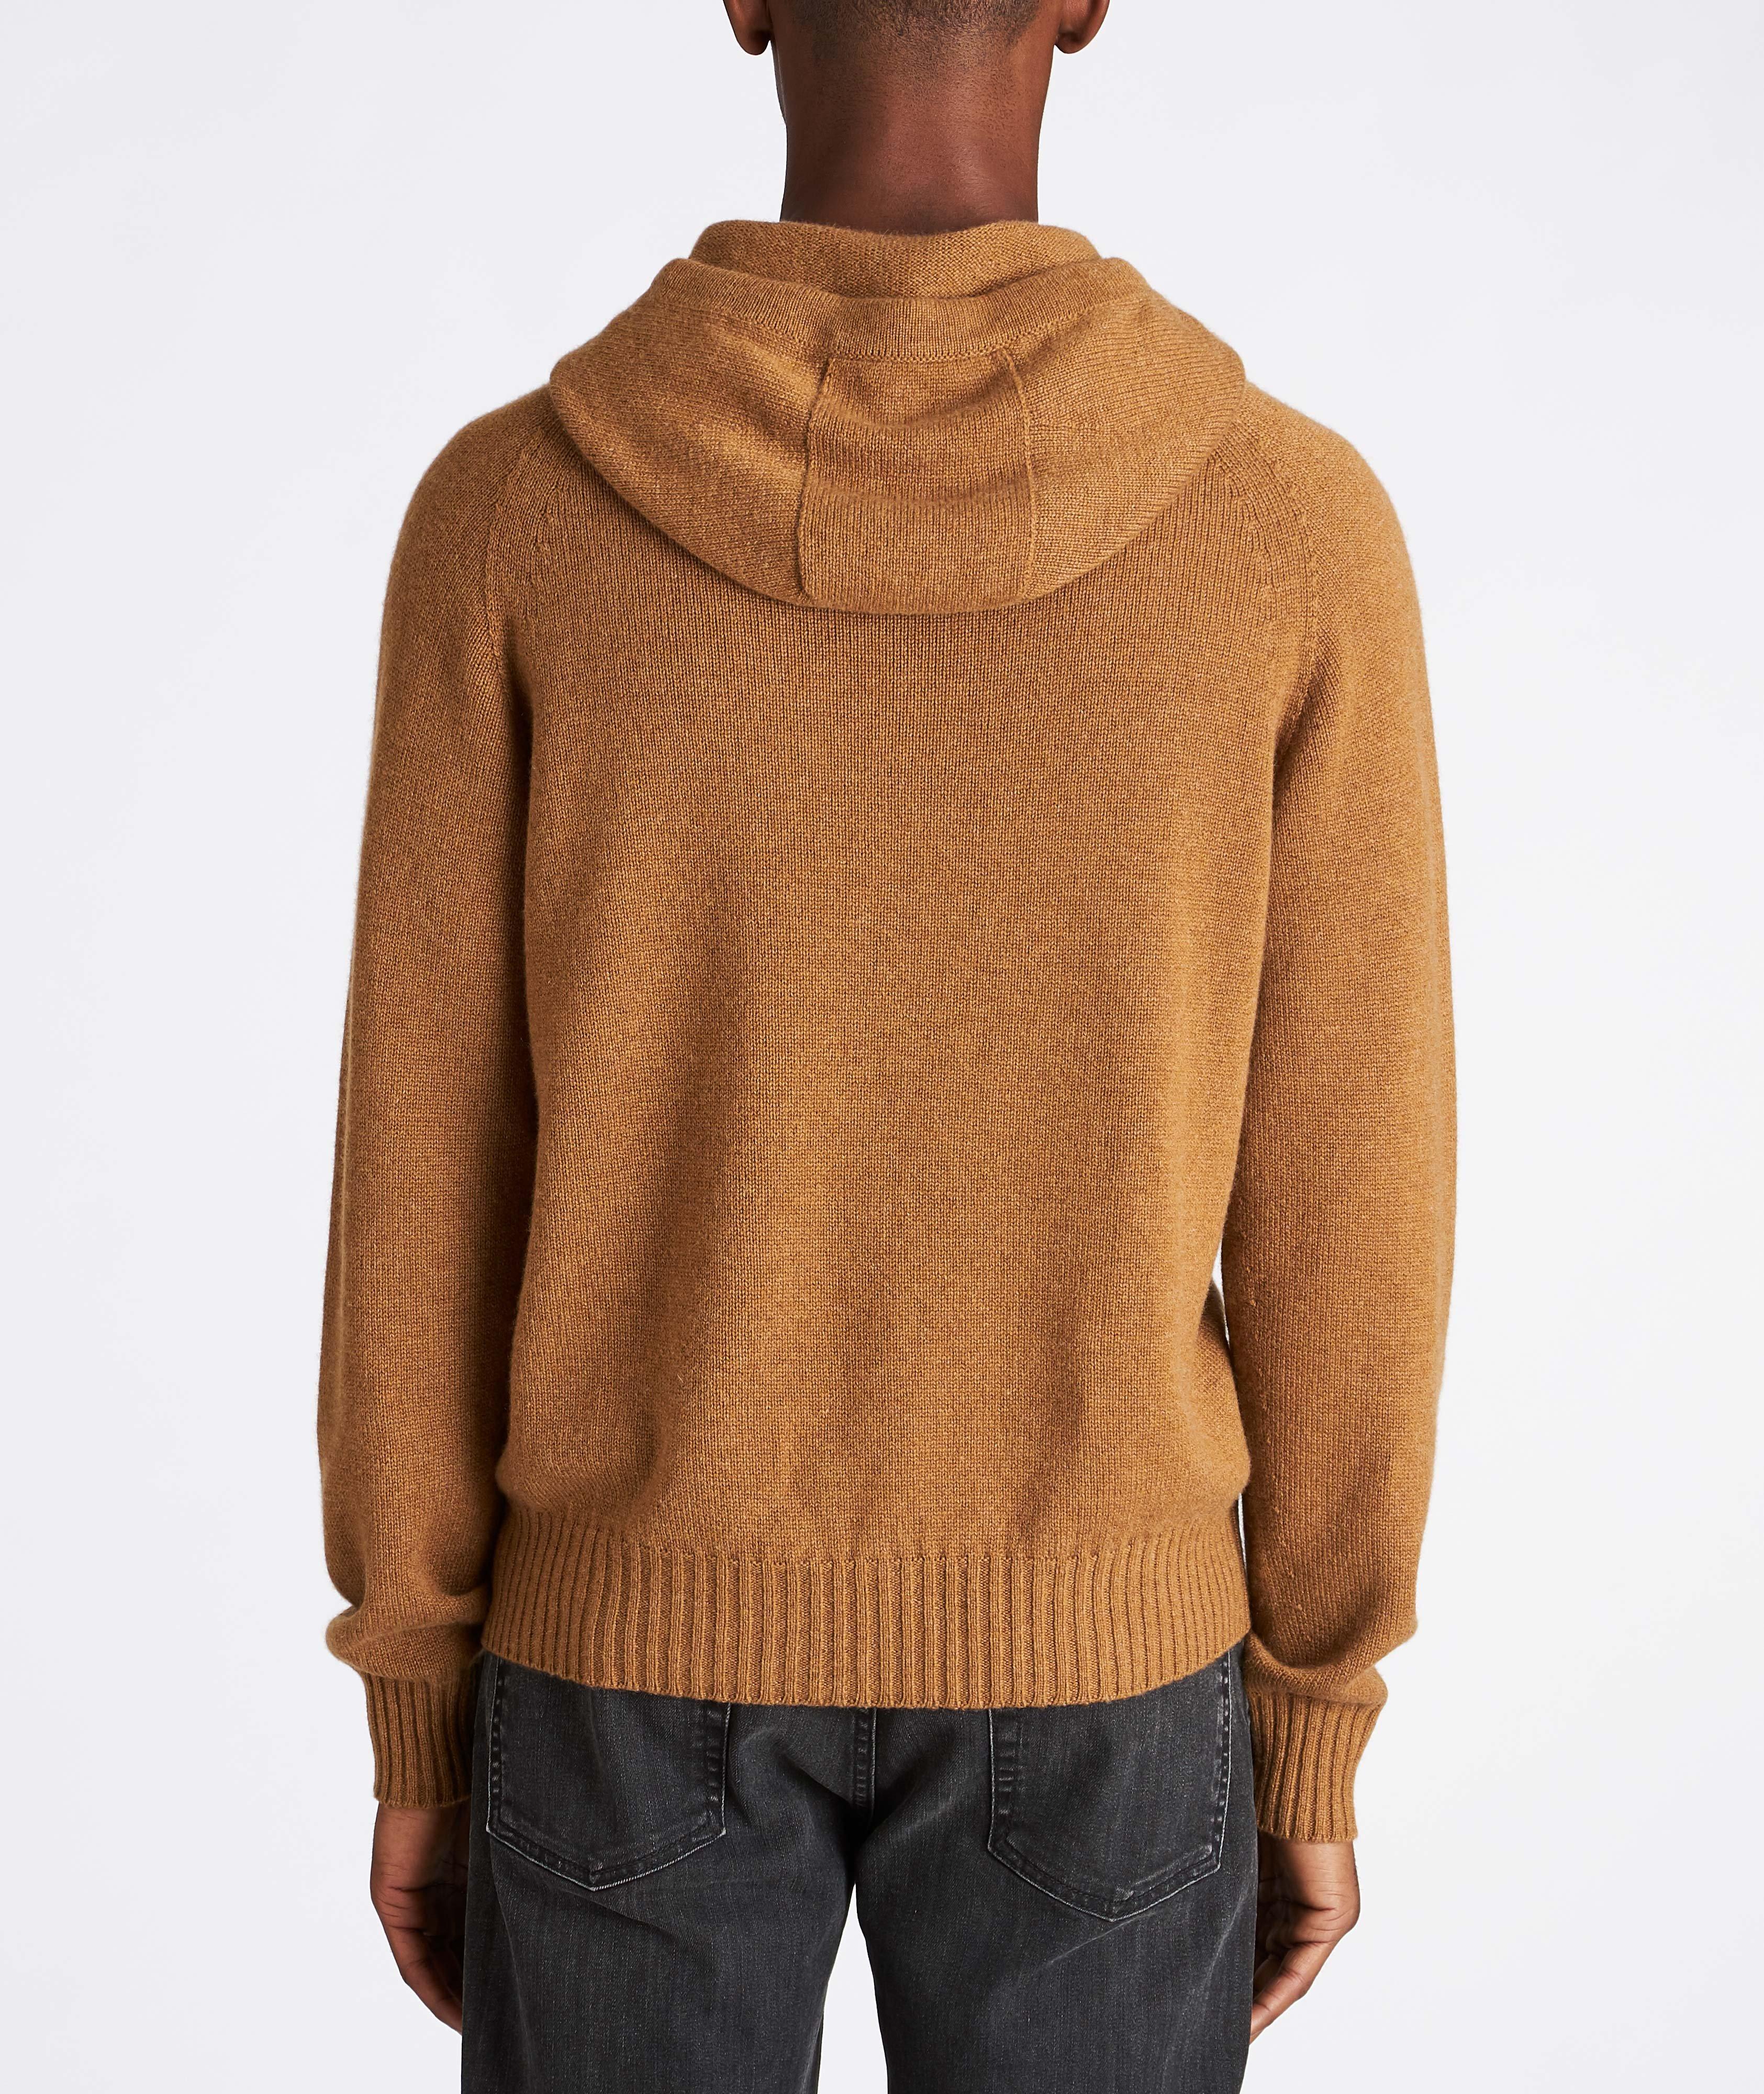 Knit Cashmere Hoodie image 2